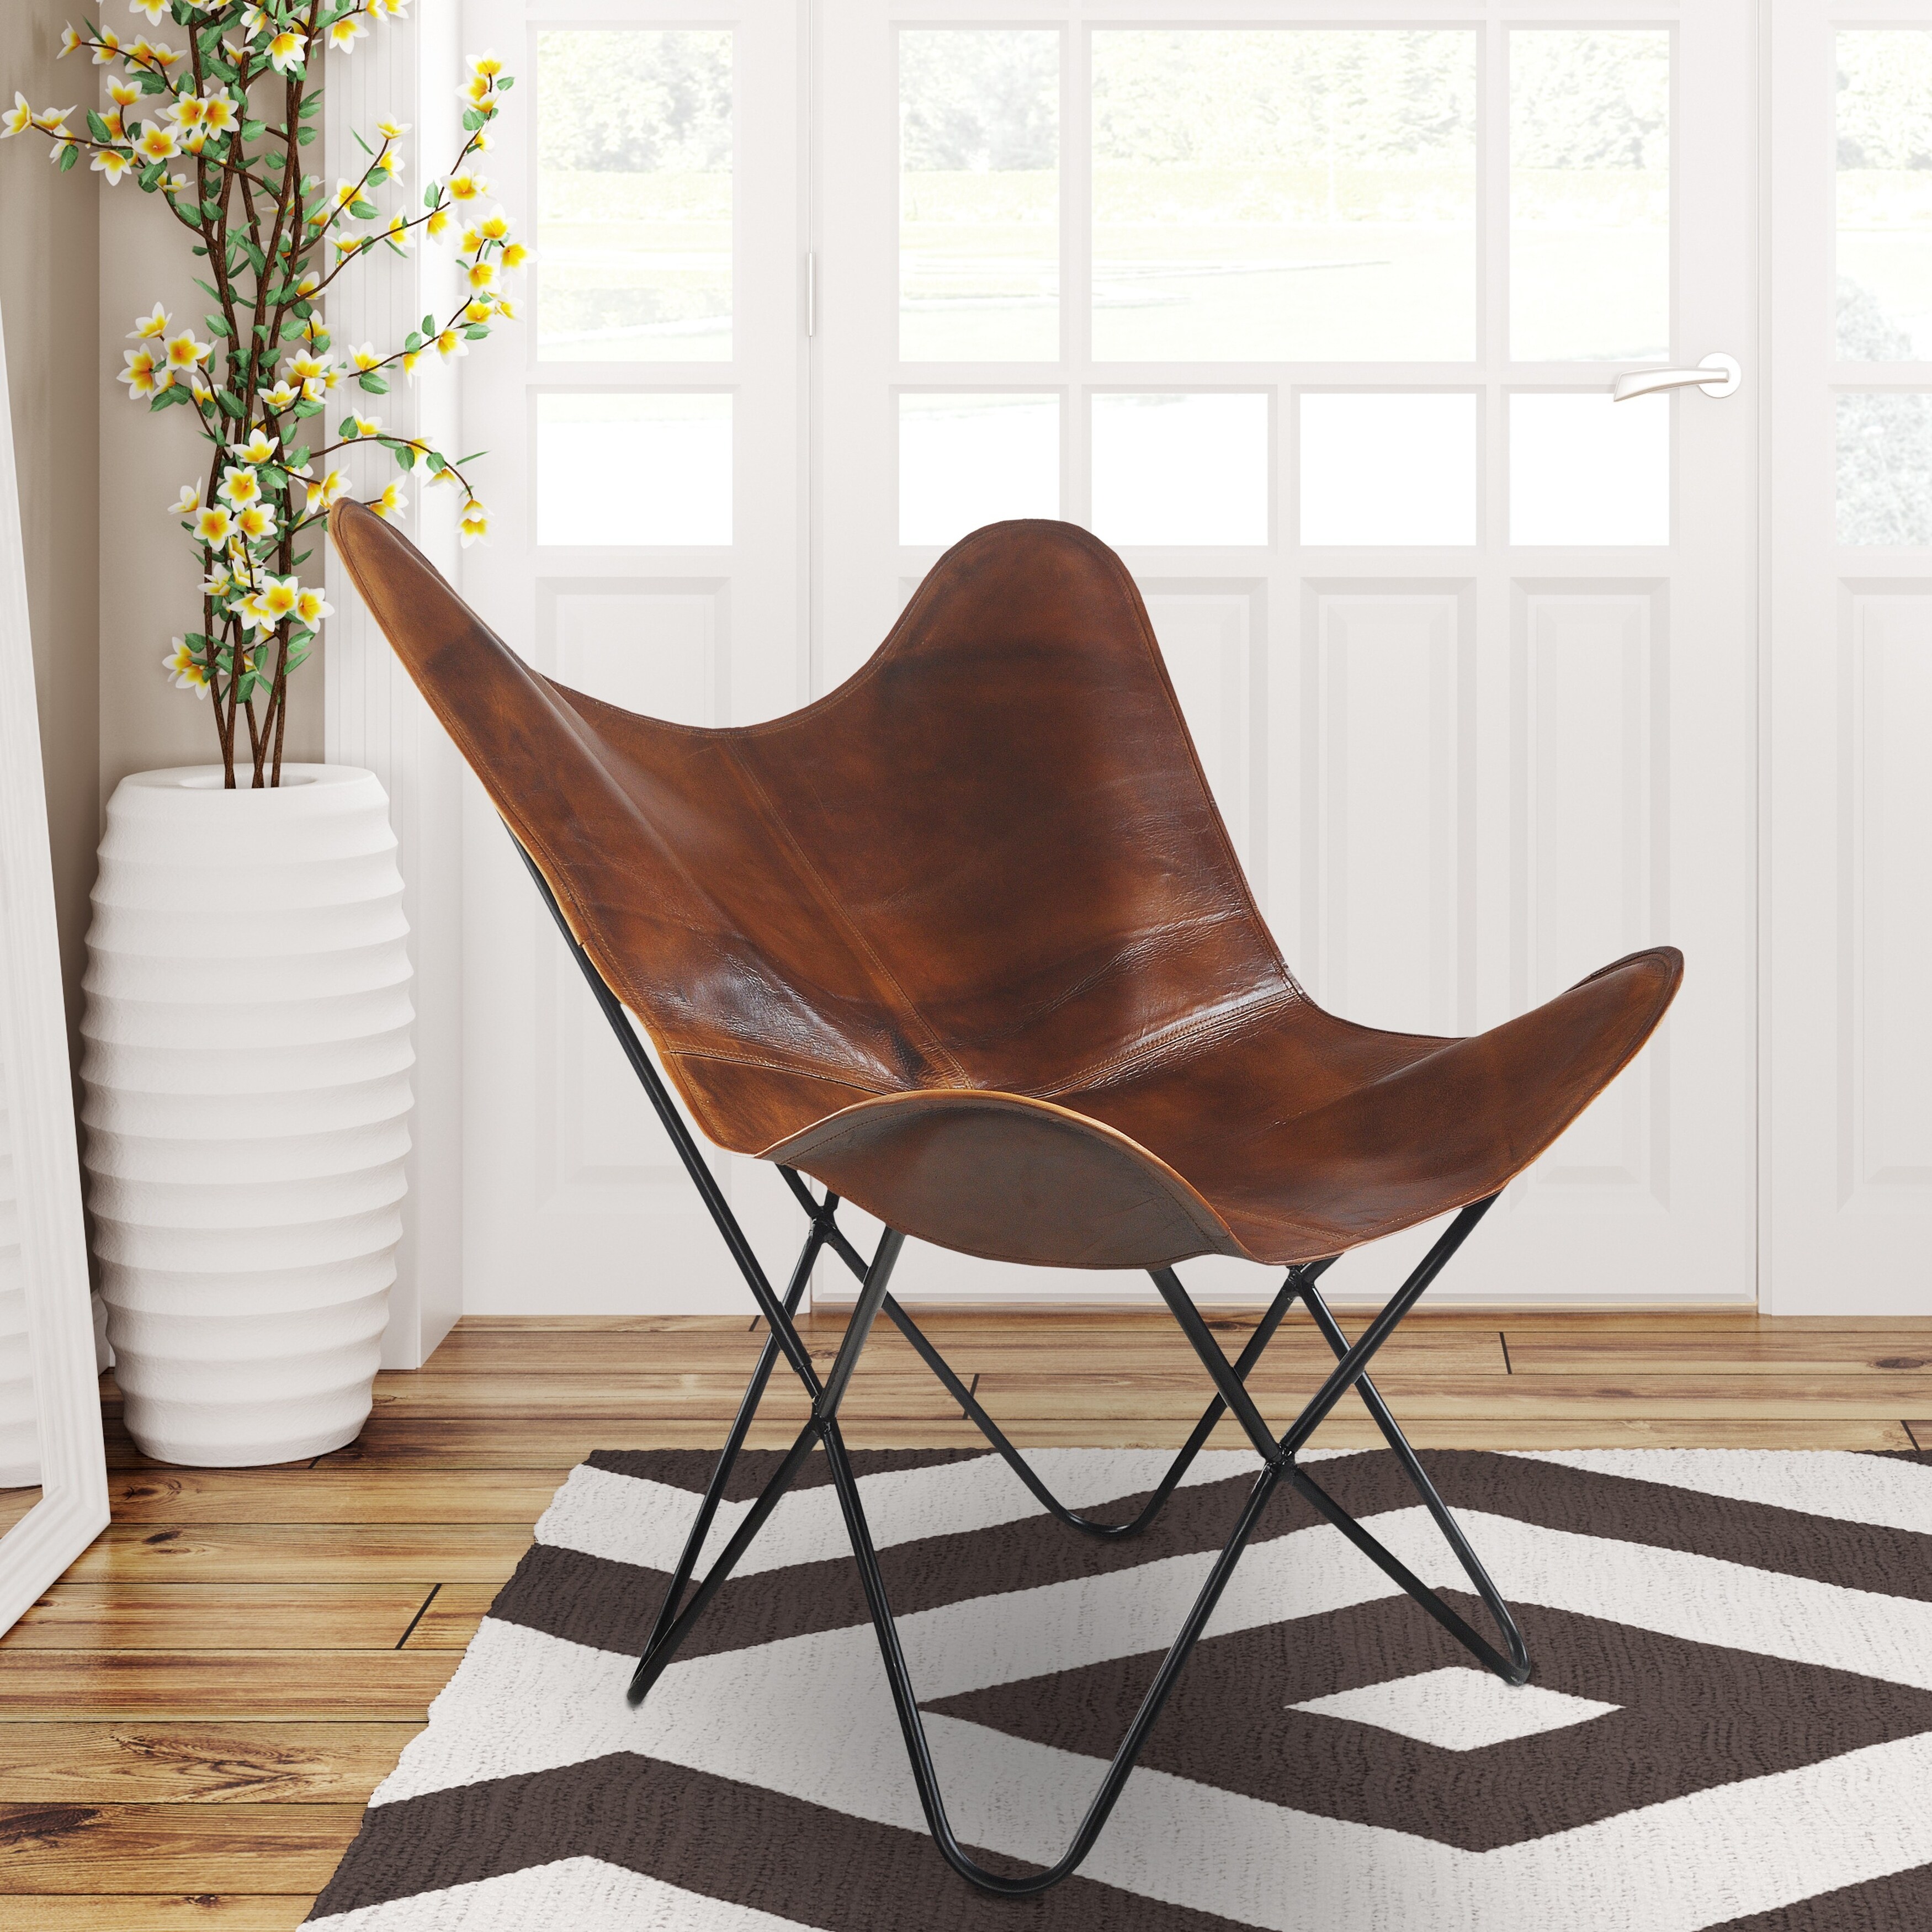 LR Home Brown Leather Butterfly Chair - 37" L x 27" W x 16" D